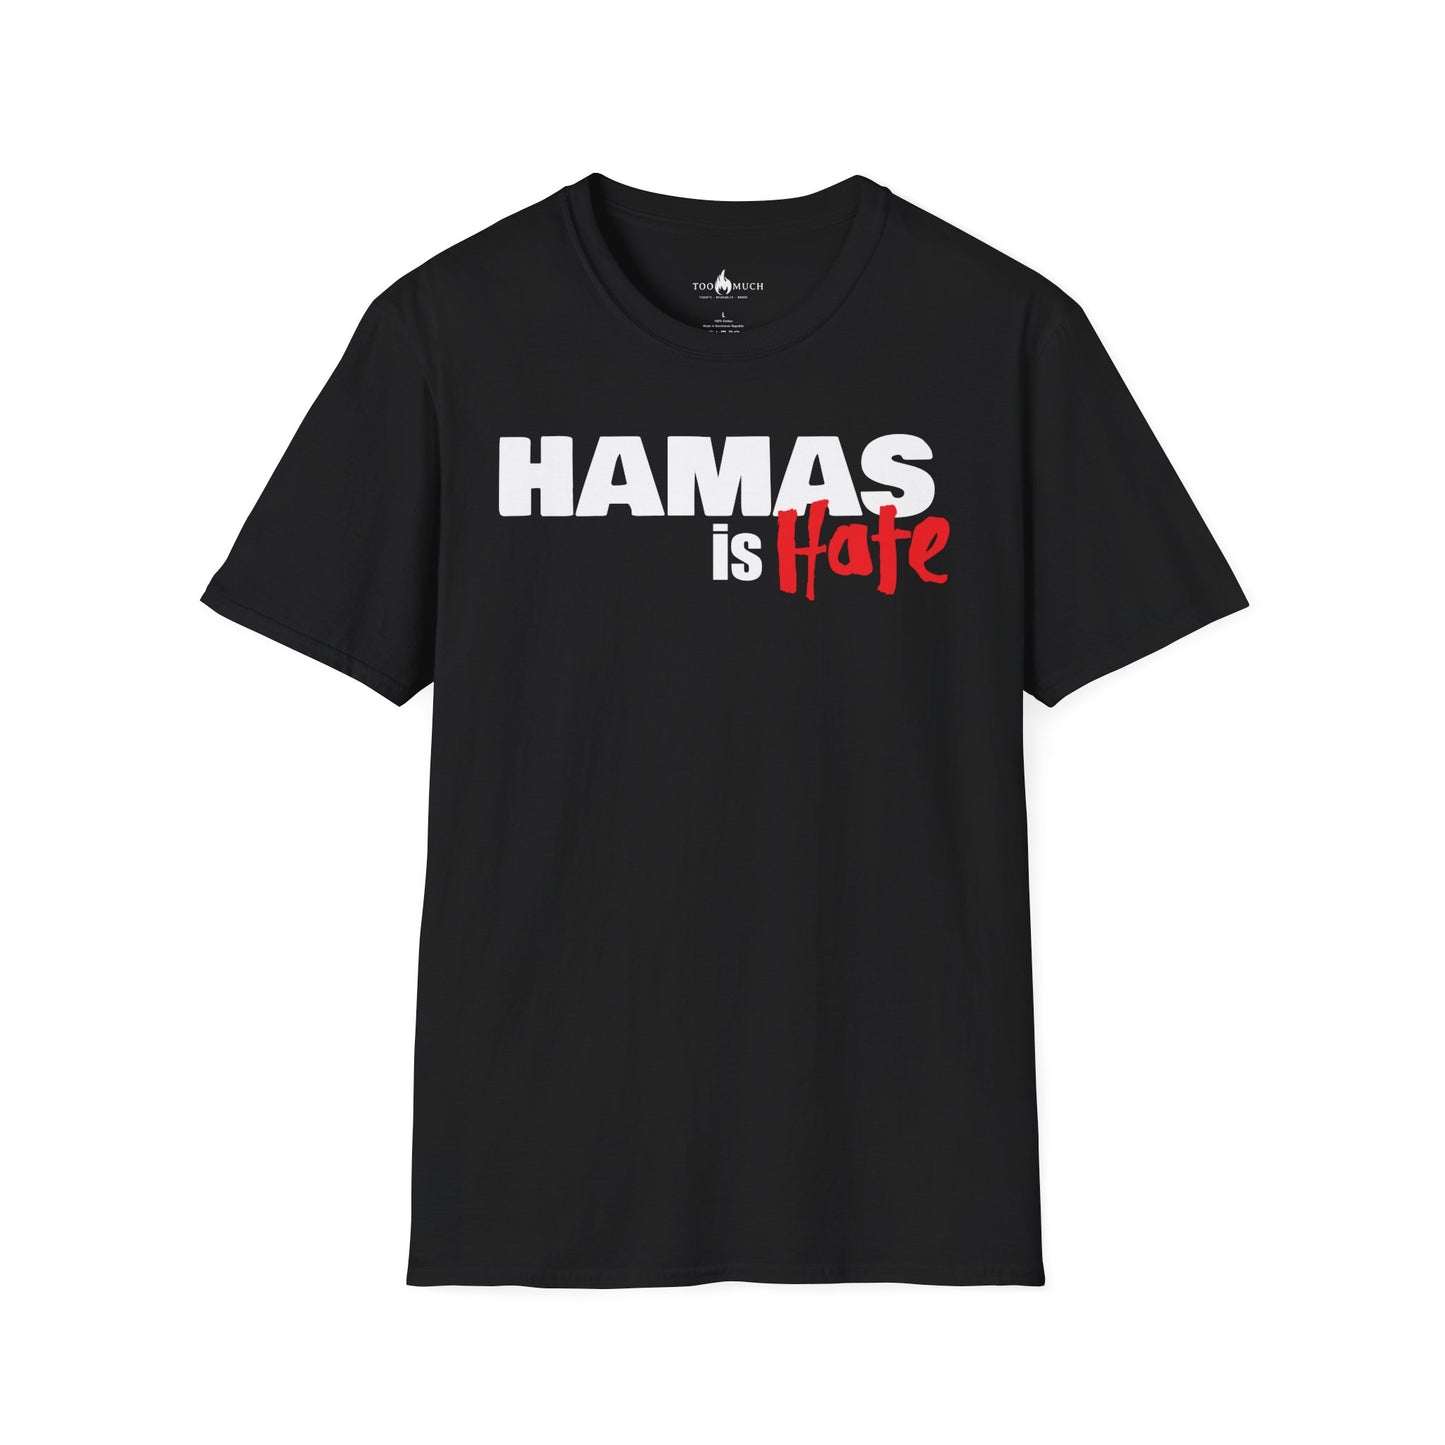 Hamas is Hate